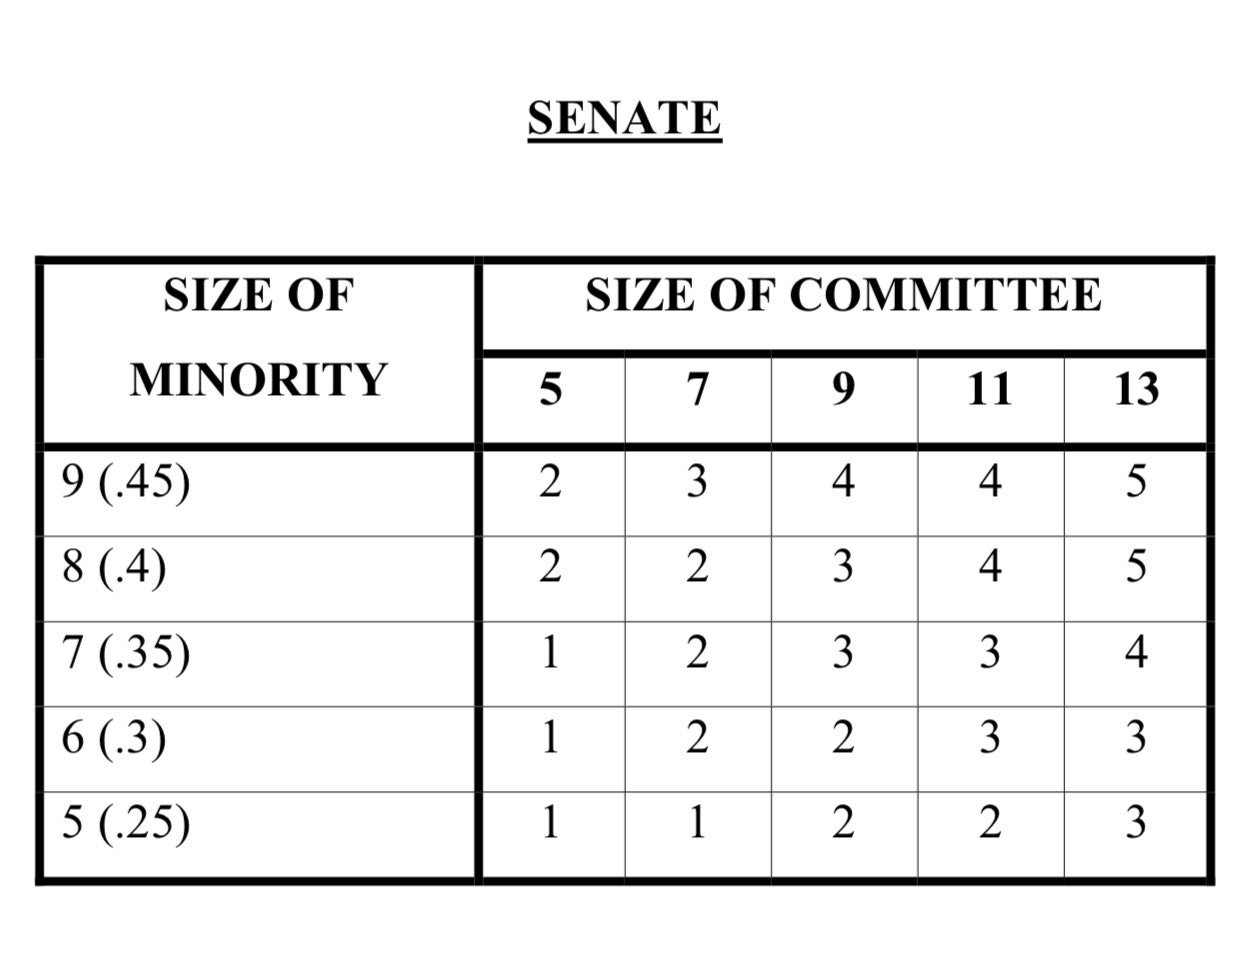 When the Senate majority hits 16, it means the minority is just 4 (and therefore not due any seats). The chart only goes down to 5.